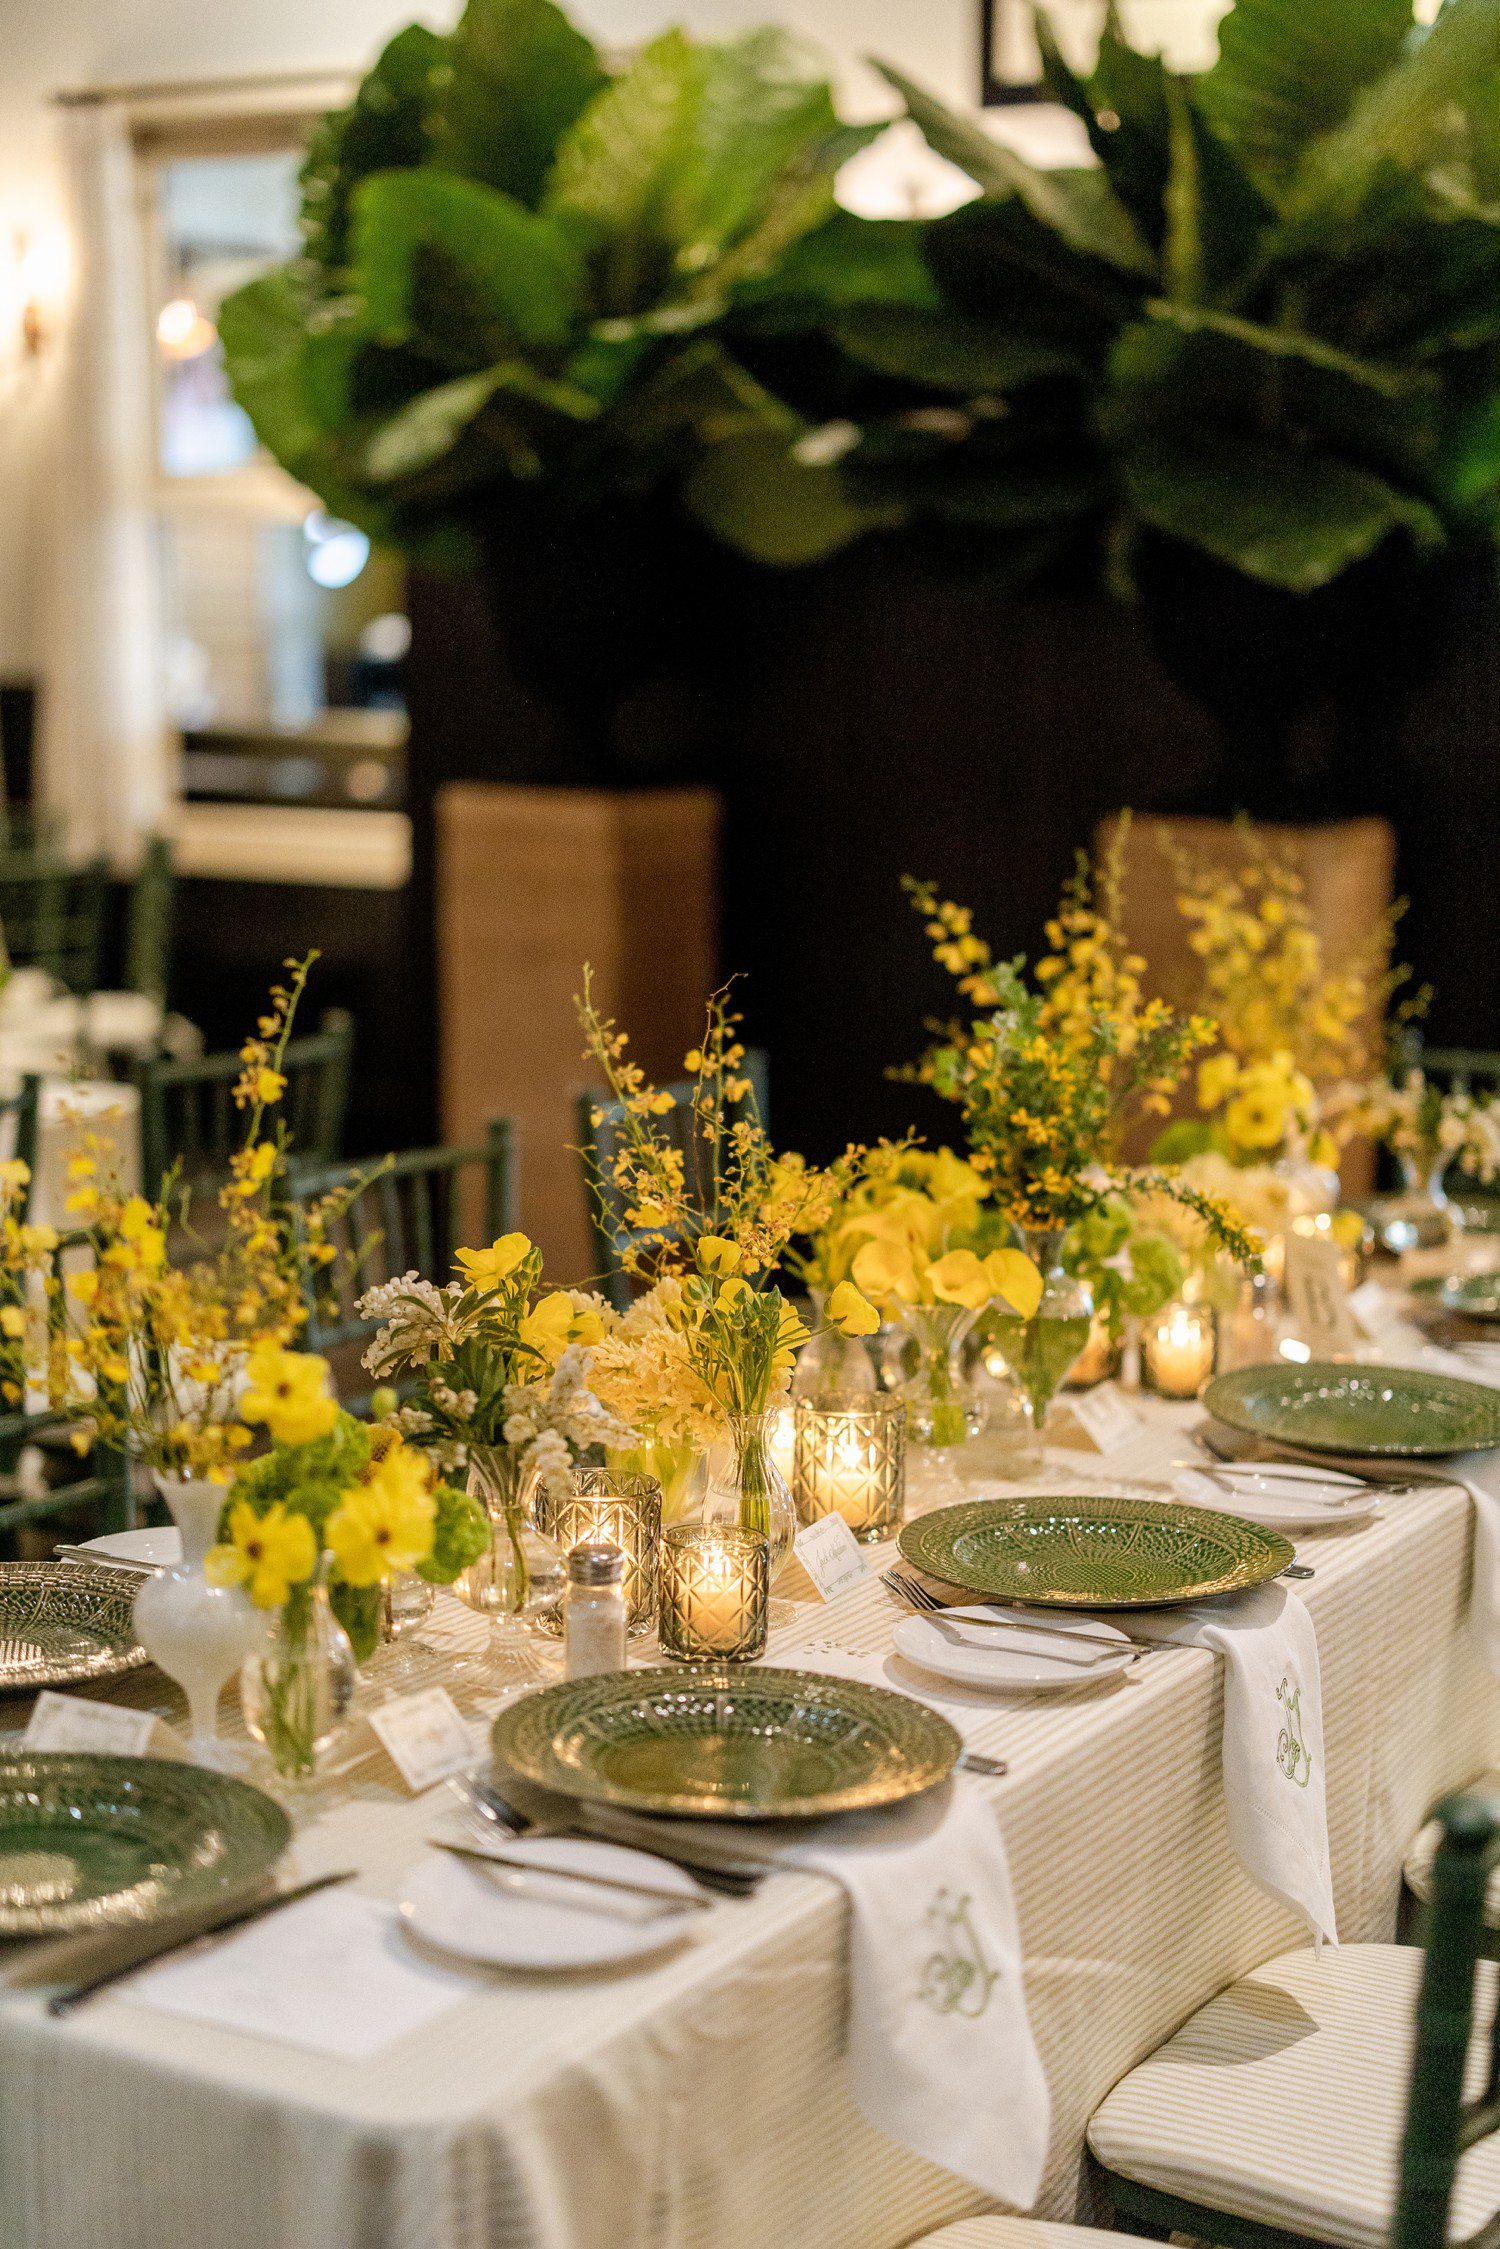 Wedding rehearsal dinner at Ousie's in Houston with yellow flowers decorating tables.